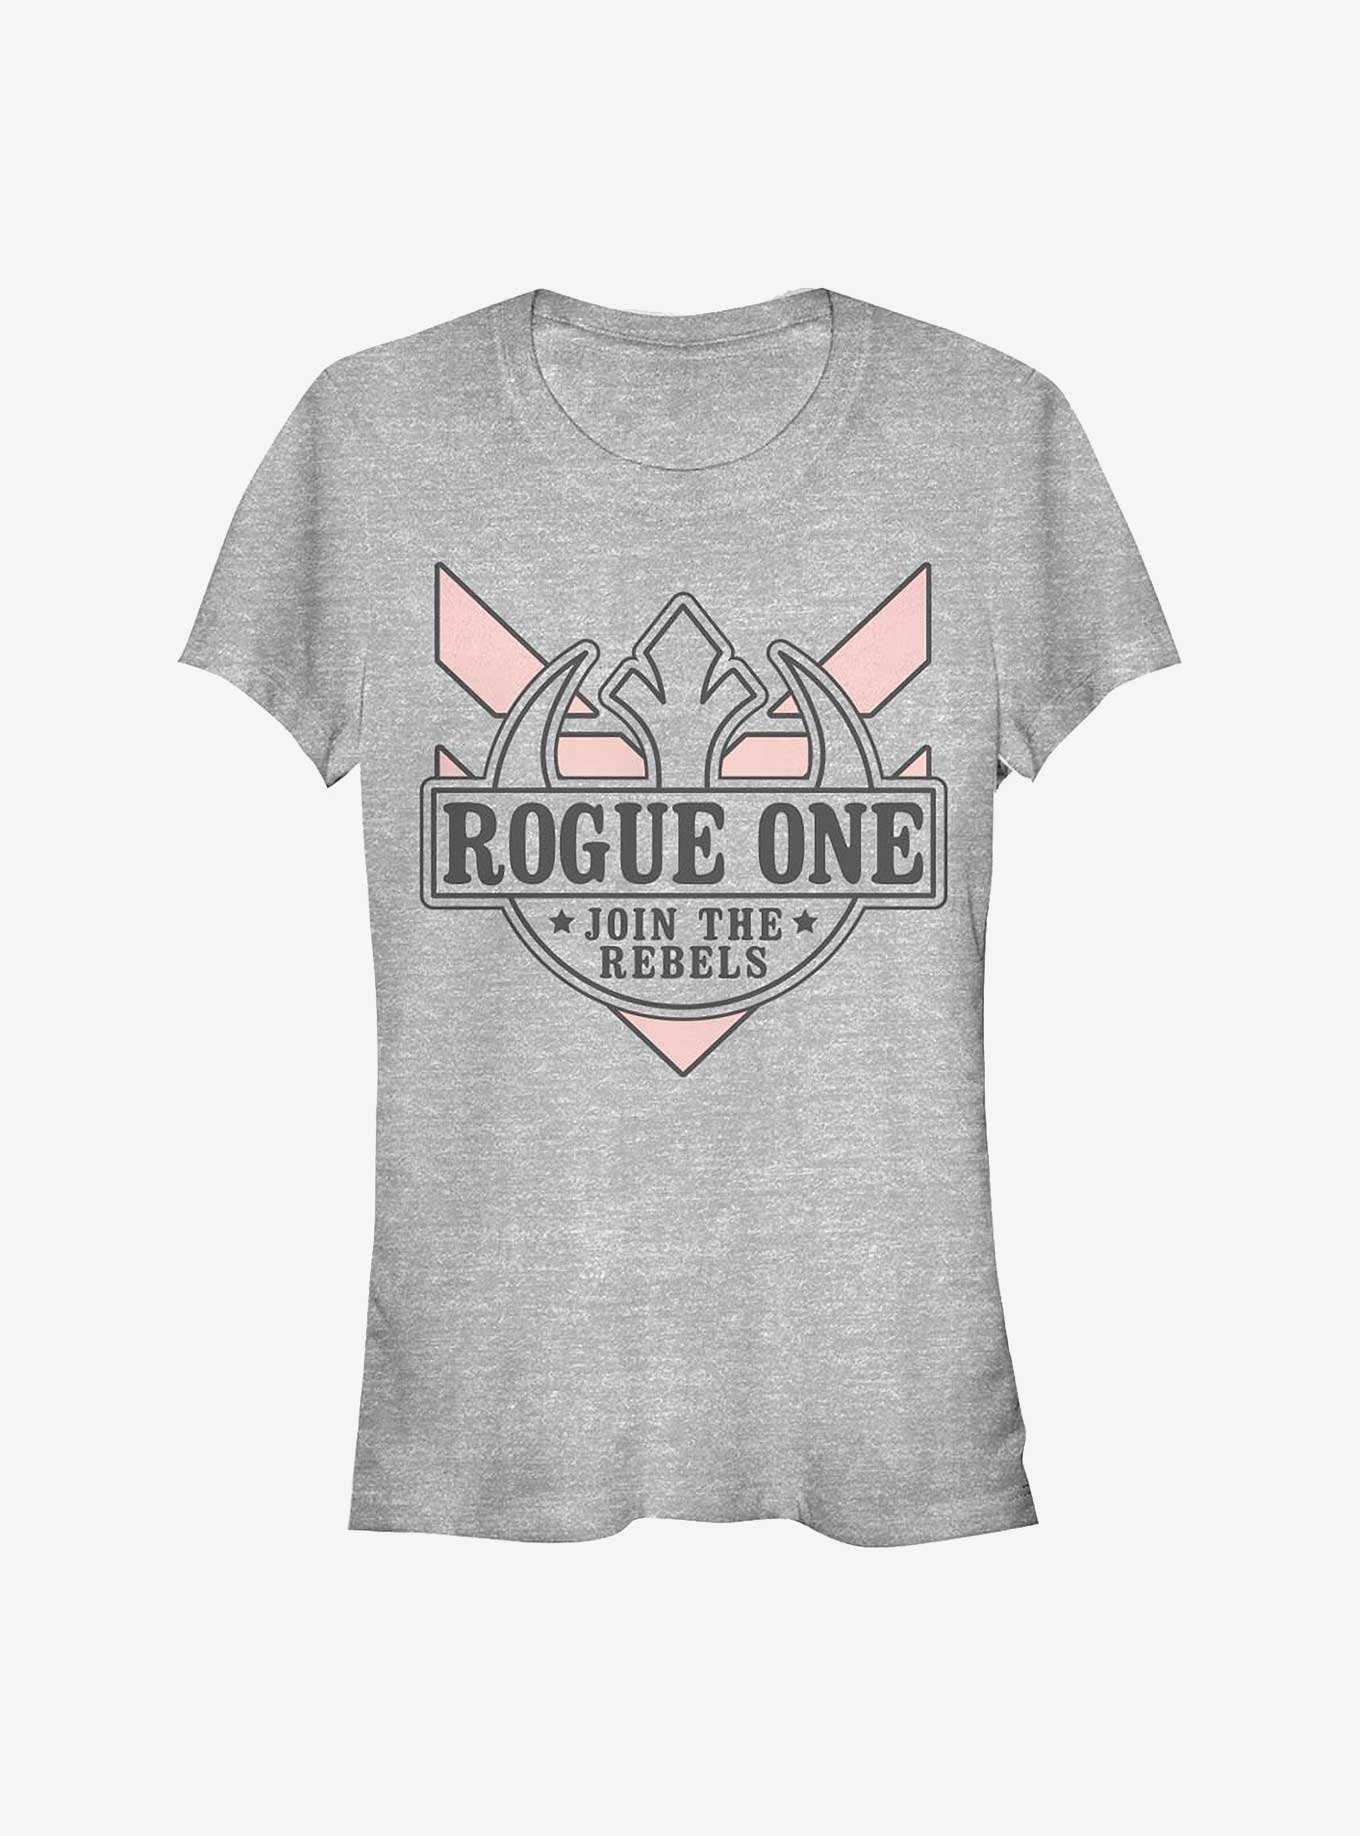 Star Wars Rogue One: A Star Wars Story Join The Rebels Girls T-Shirt, , hi-res